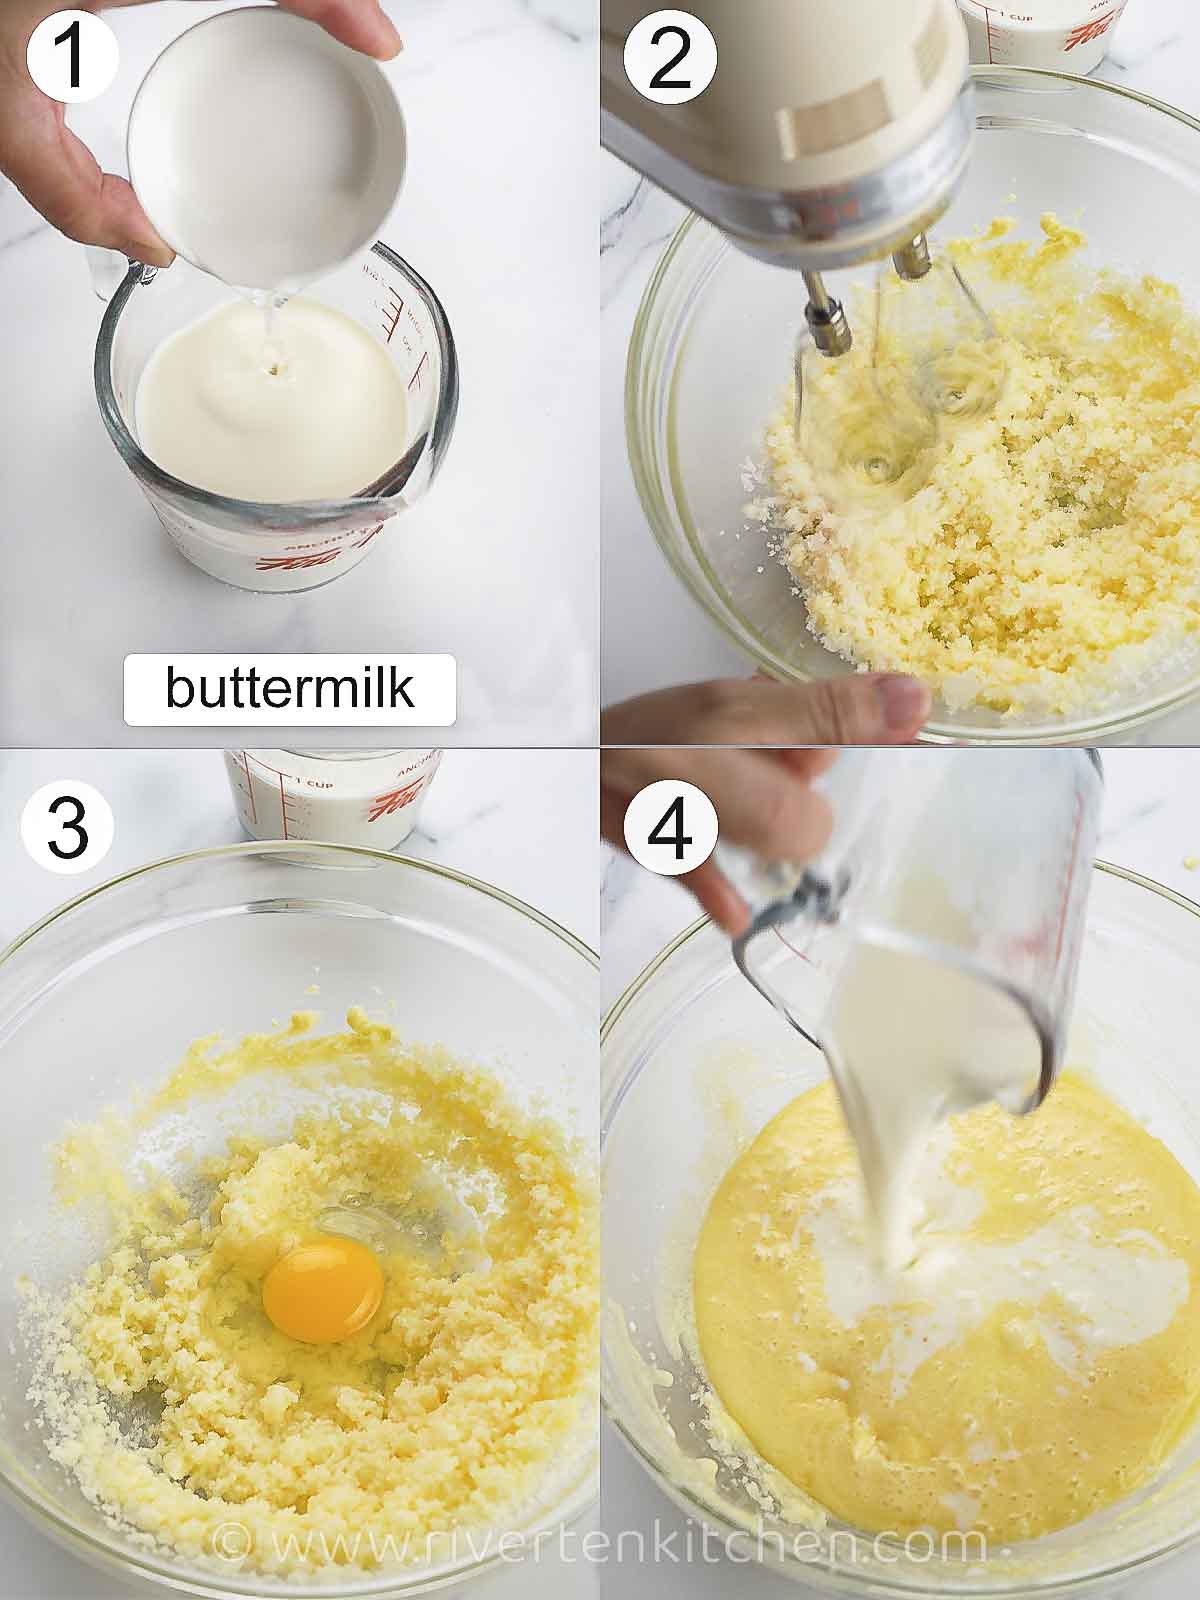 step by step process on how to make red velvet cake batter